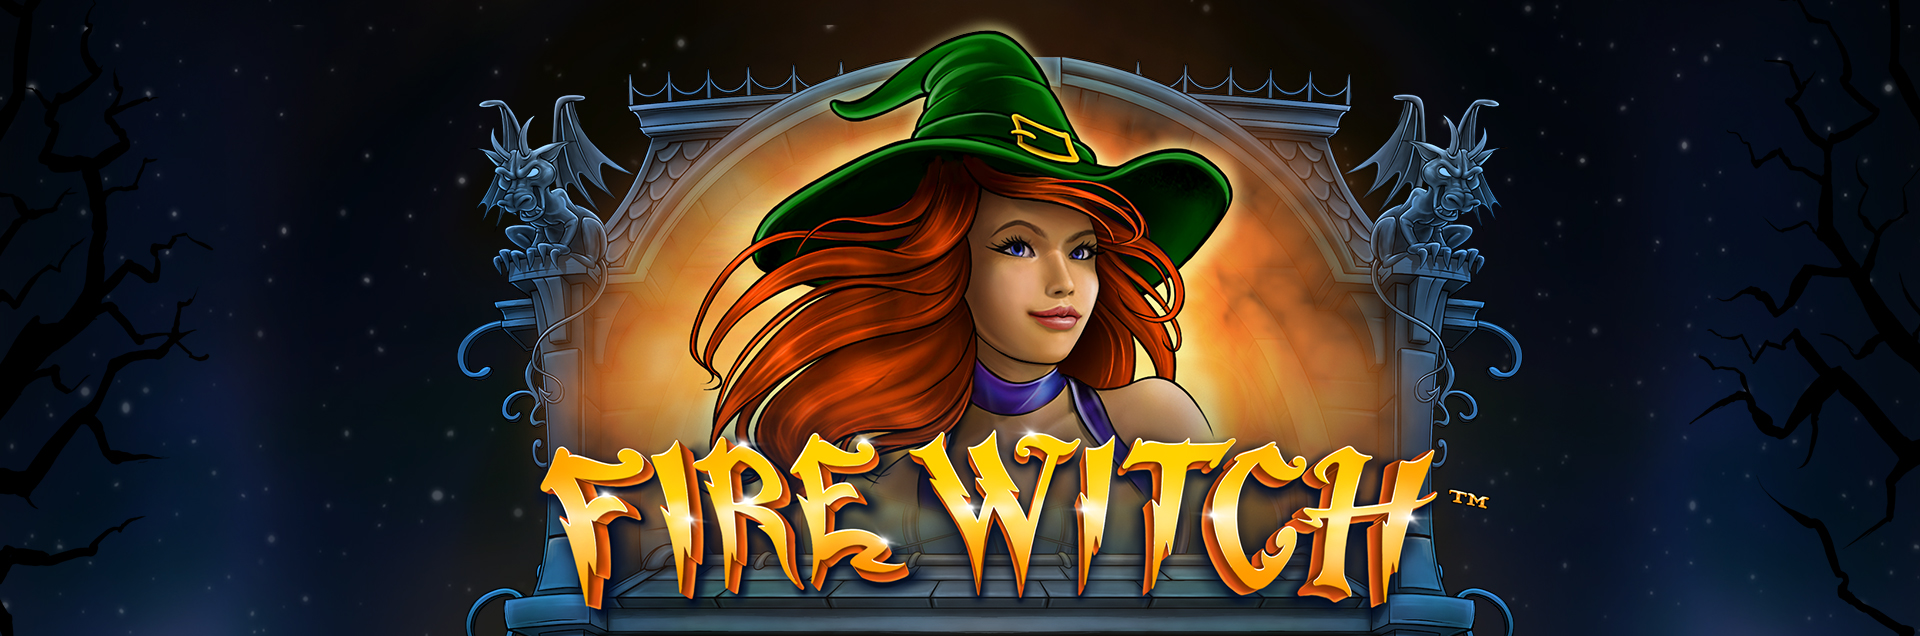 Fire Witch Header Image Games